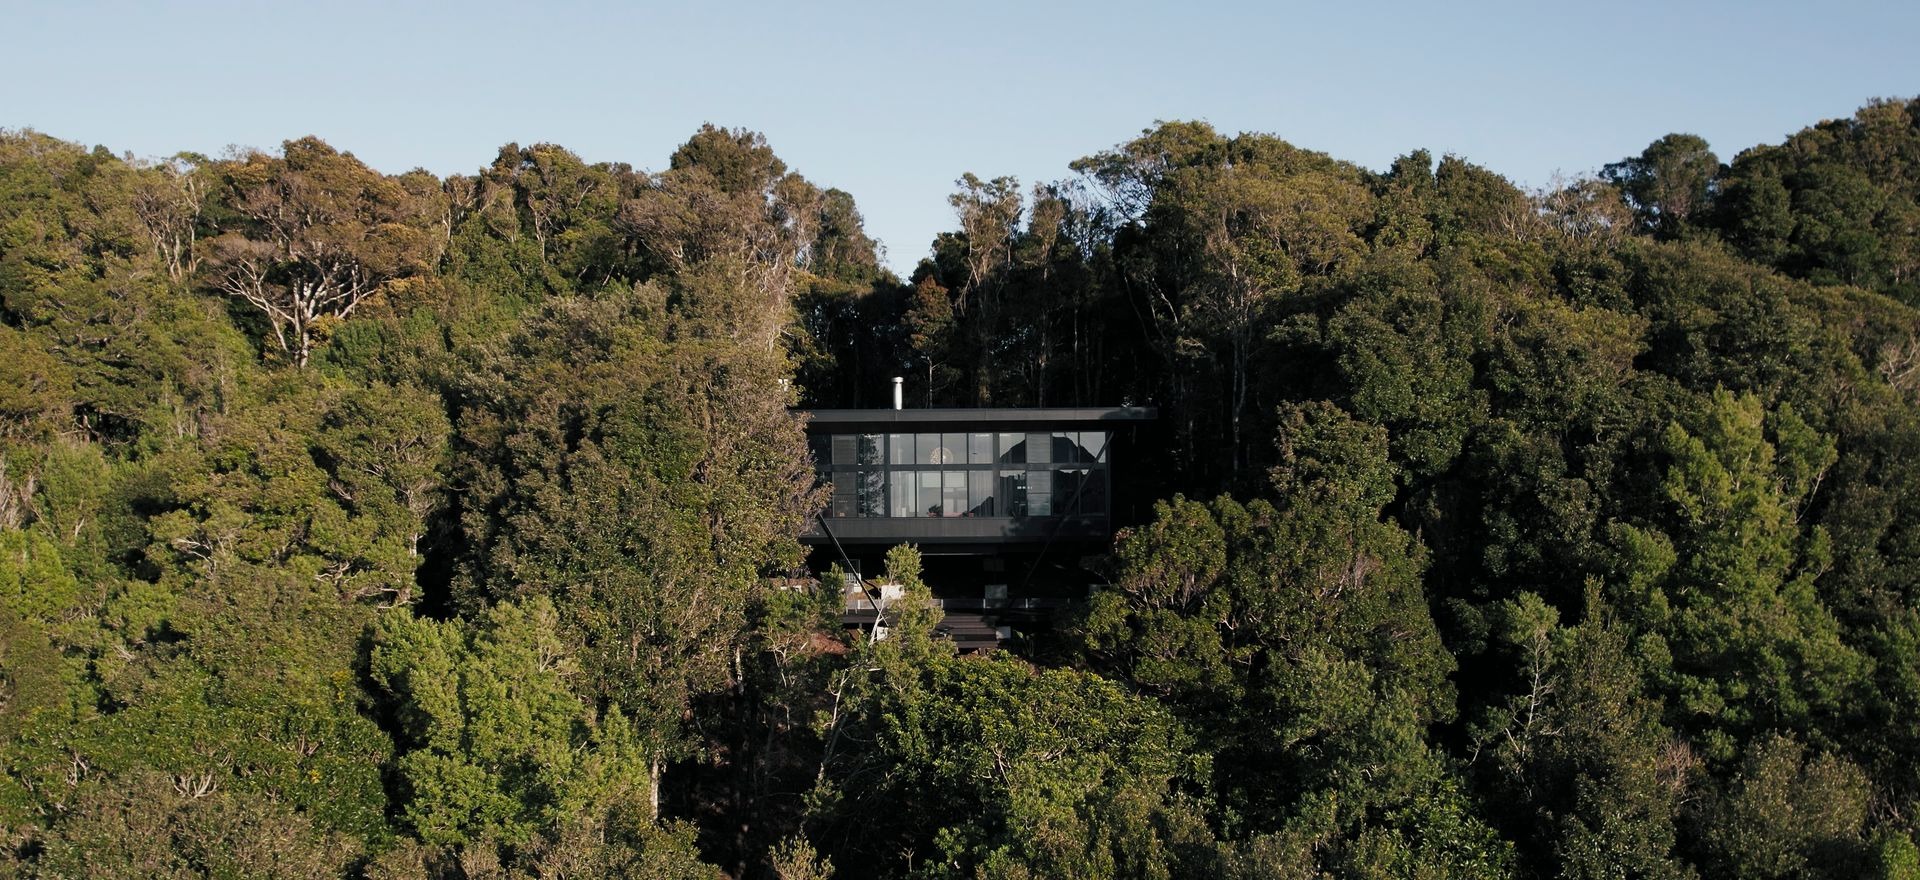 Soulful escapes: the tranquil magic of a moody rainforest retreat